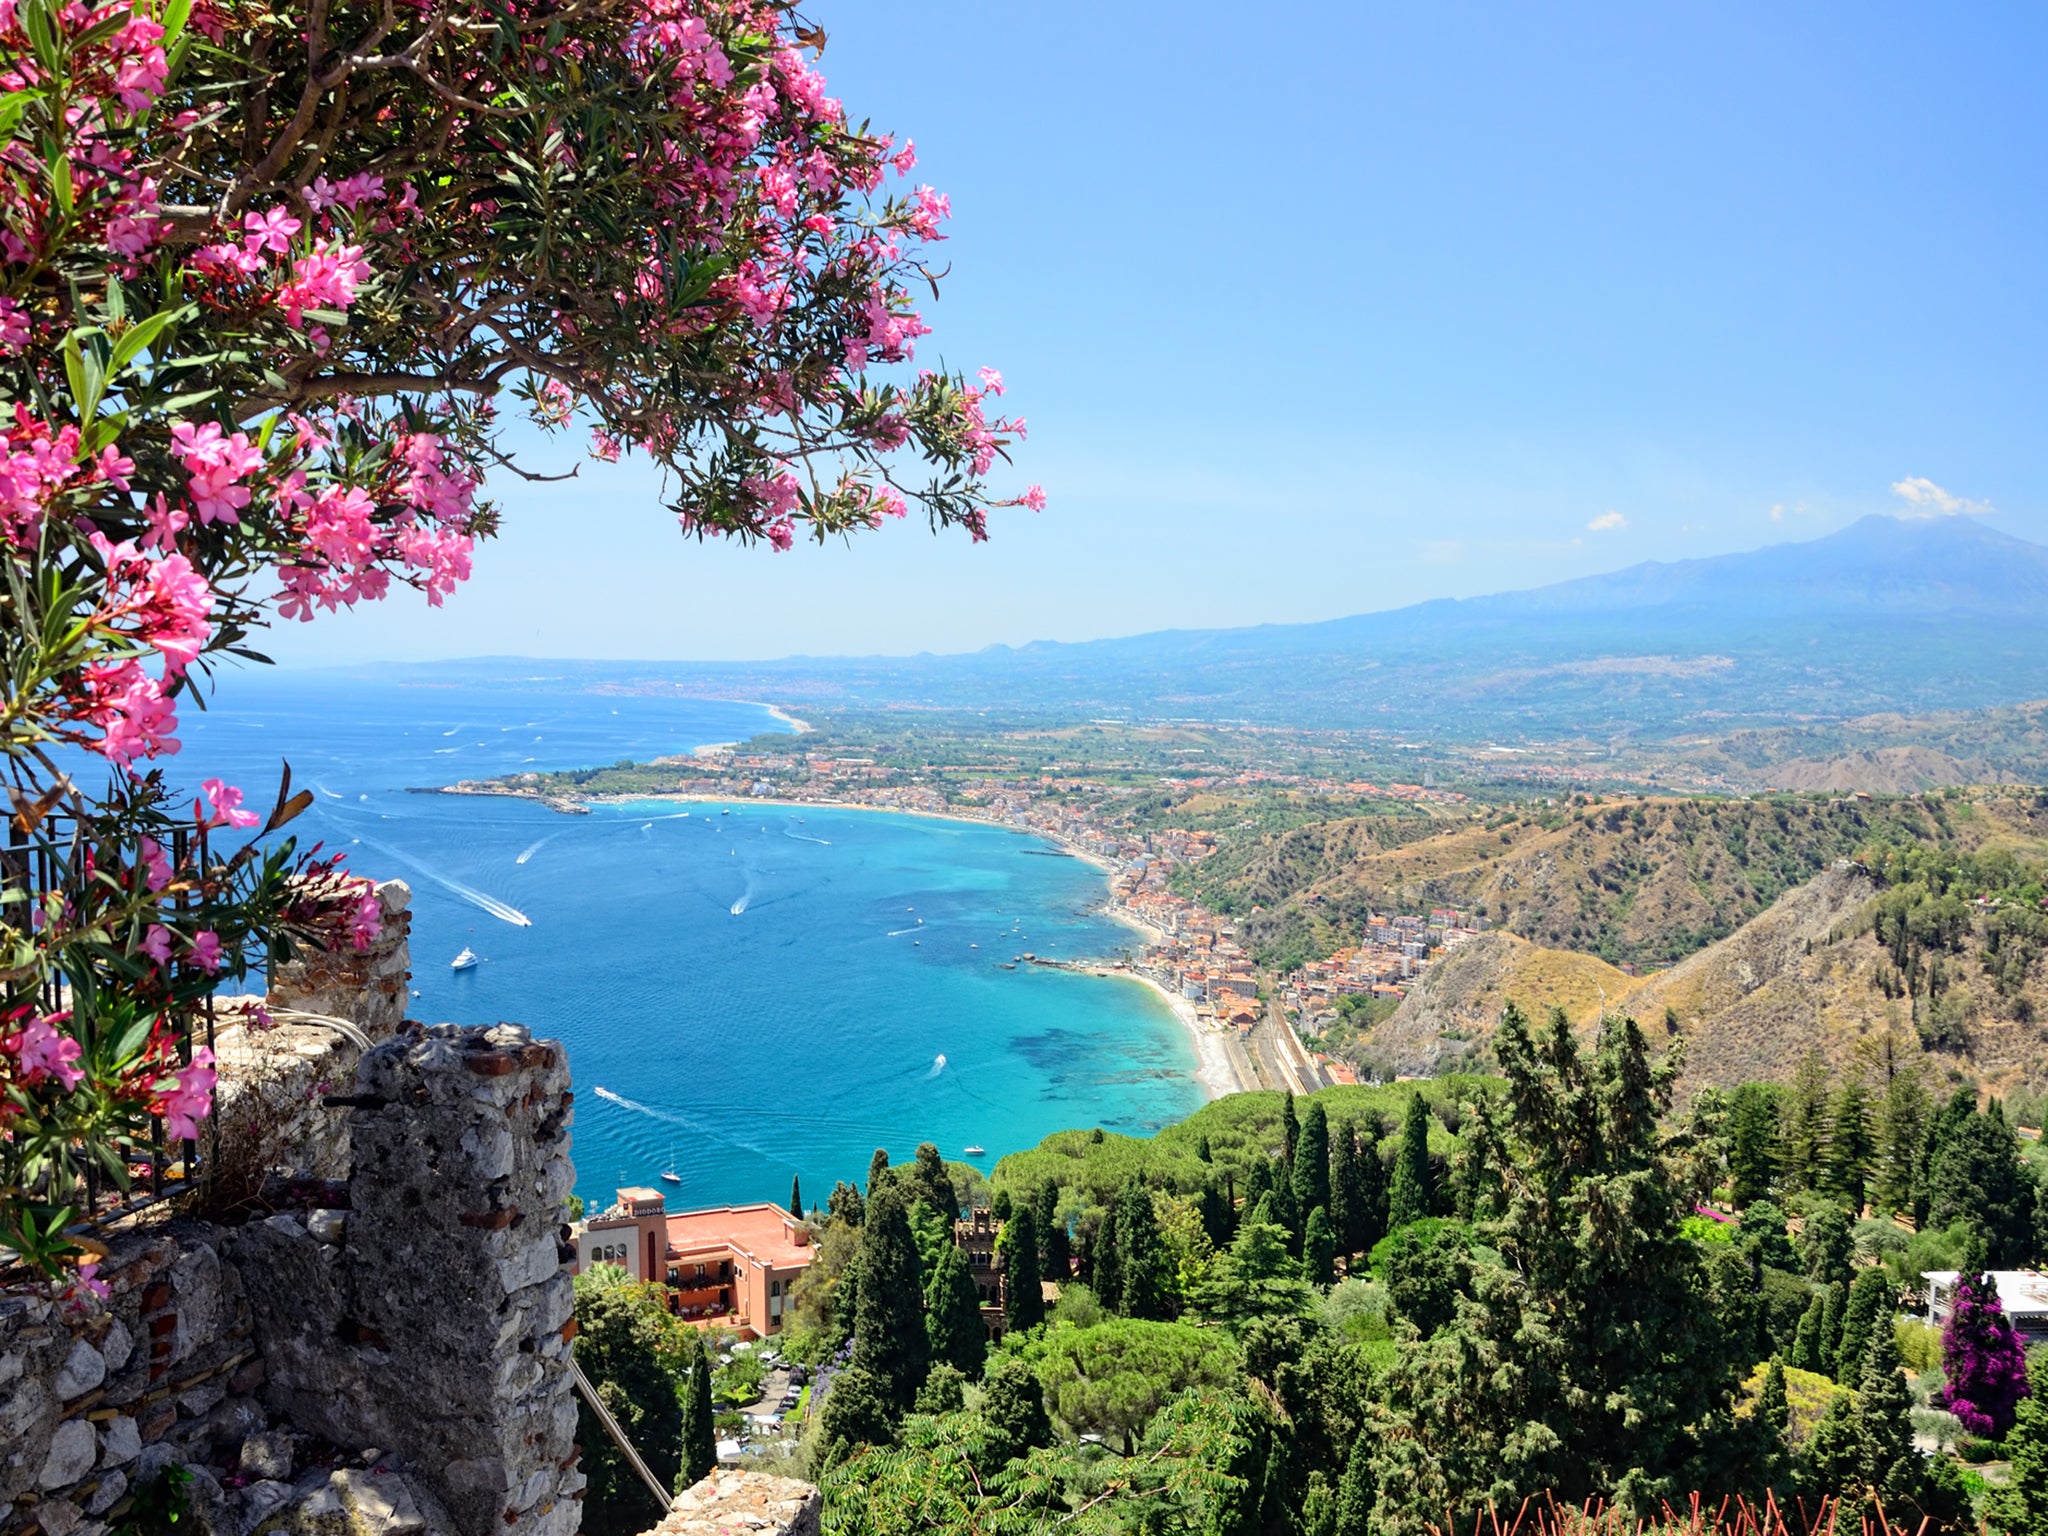 Taormina, close to the restlessness of Etna and the warmth of the Mediterranean, will be a joy at the start of June